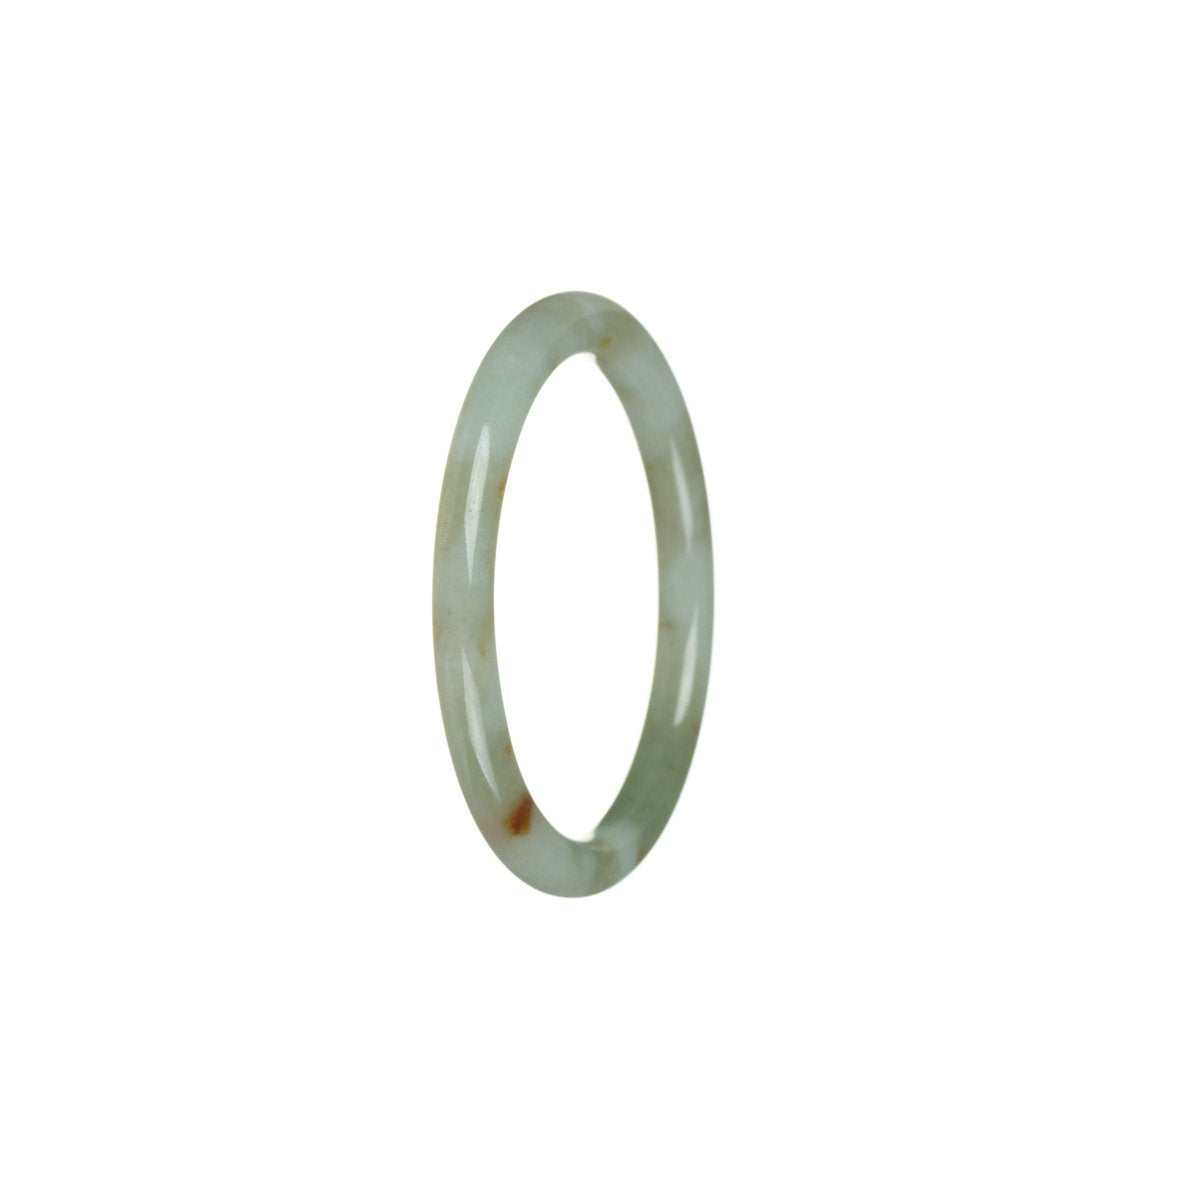 A close-up image of a delicate green jade bangle bracelet designed for a child. The smooth, round jade stone is a vibrant shade of green and is set in a simple, elegant gold-tone setting. The bangle is small in size, perfect for a child's wrist.